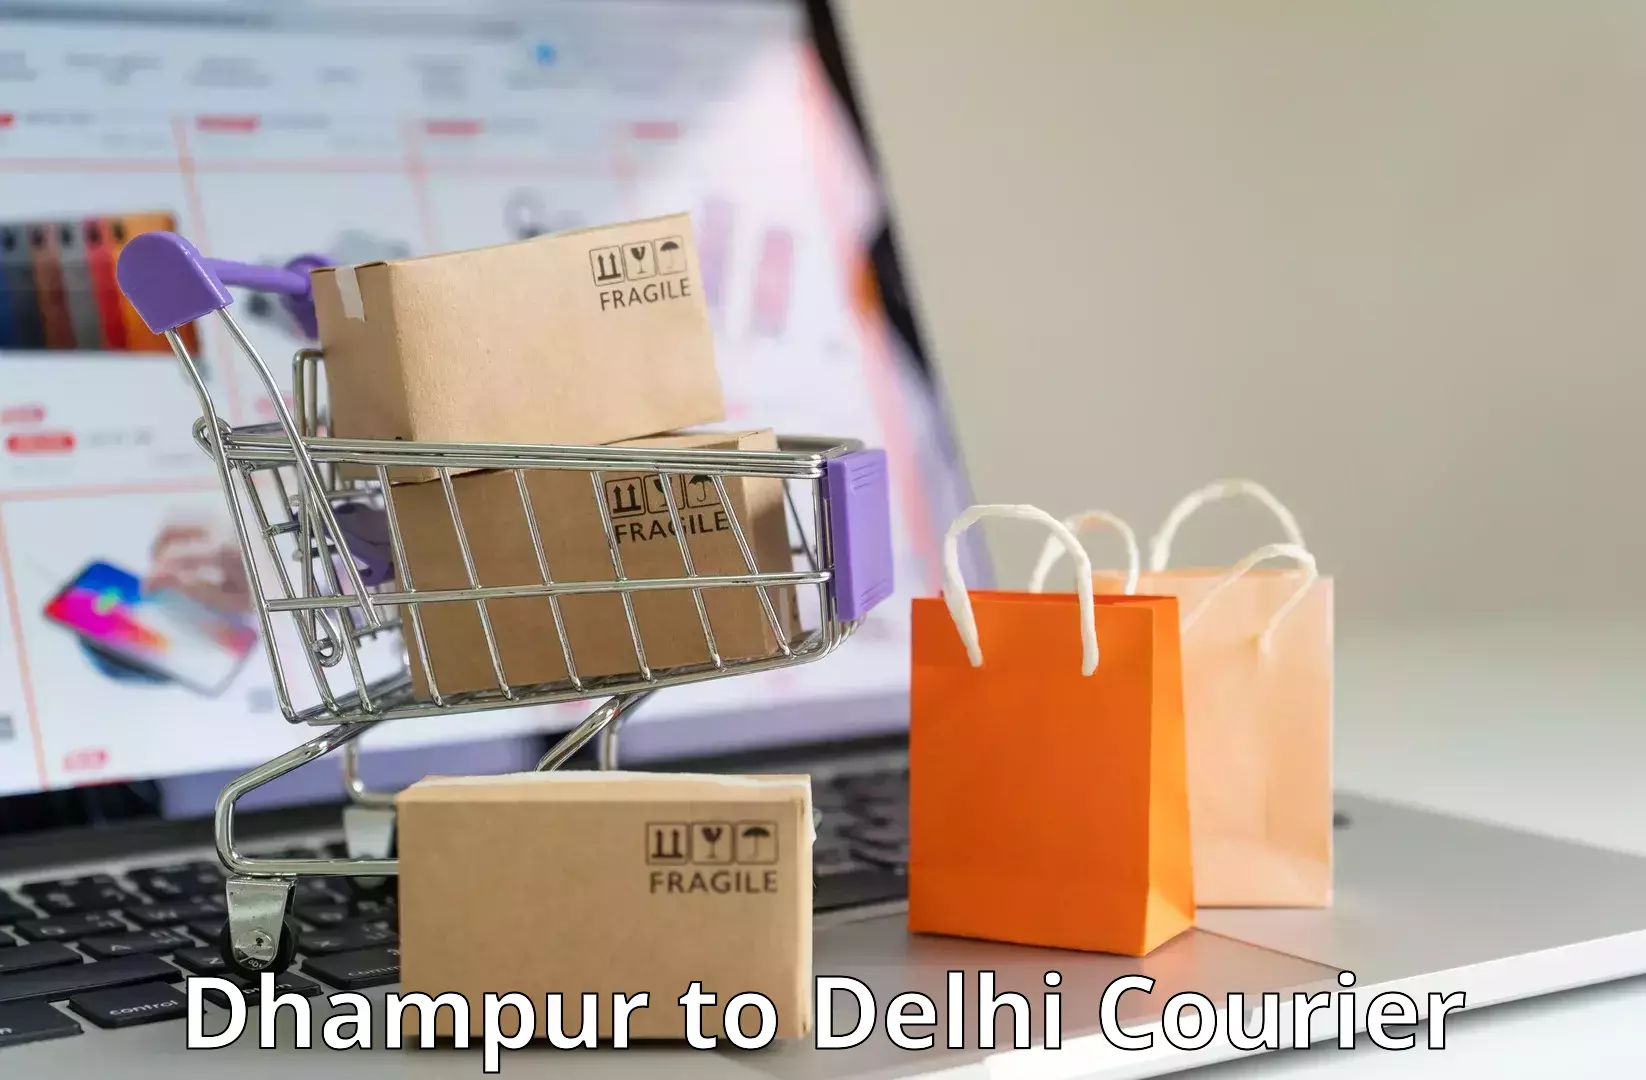 Full-service courier options Dhampur to Naraina Industrial Estate